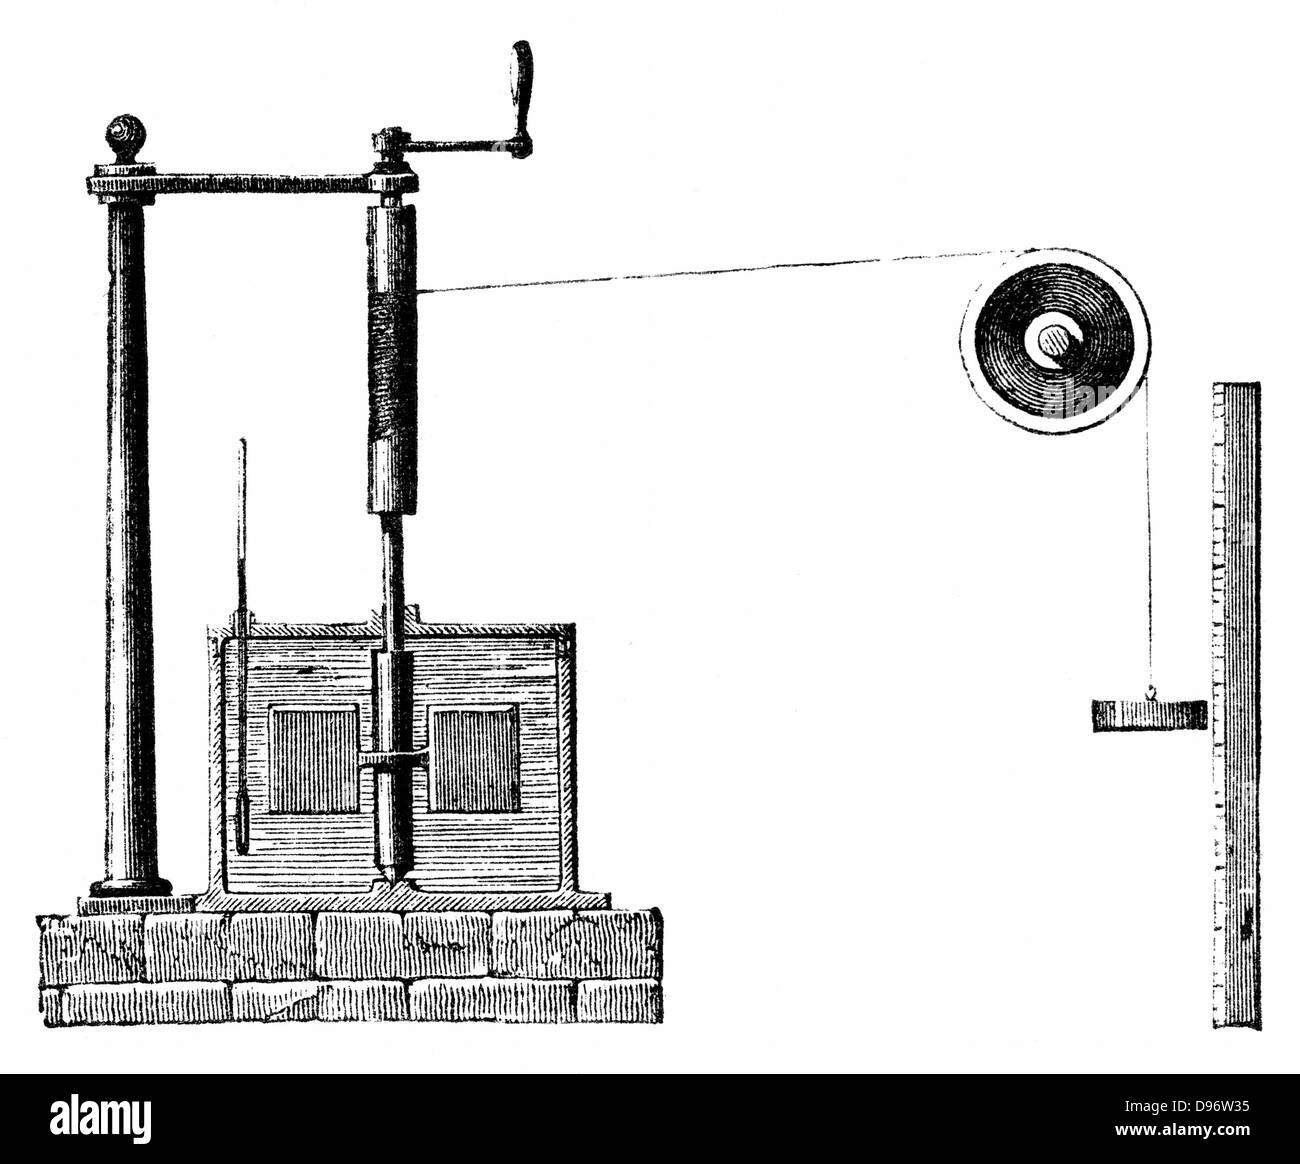 James Prescott Joule's (1818-89) apparatus for determining mechanical equivalent of heat. Vessel of water, oil or mercury encloses vanes attached to spindle. Cord wound round cylinder and drum. Weight descending against scale rotates spindle and vanes. Raising and lowering weight raises temperature of fluid. From rise in temperature and distance travelled energy used can be calculated. Engraving 1872. Stock Photo